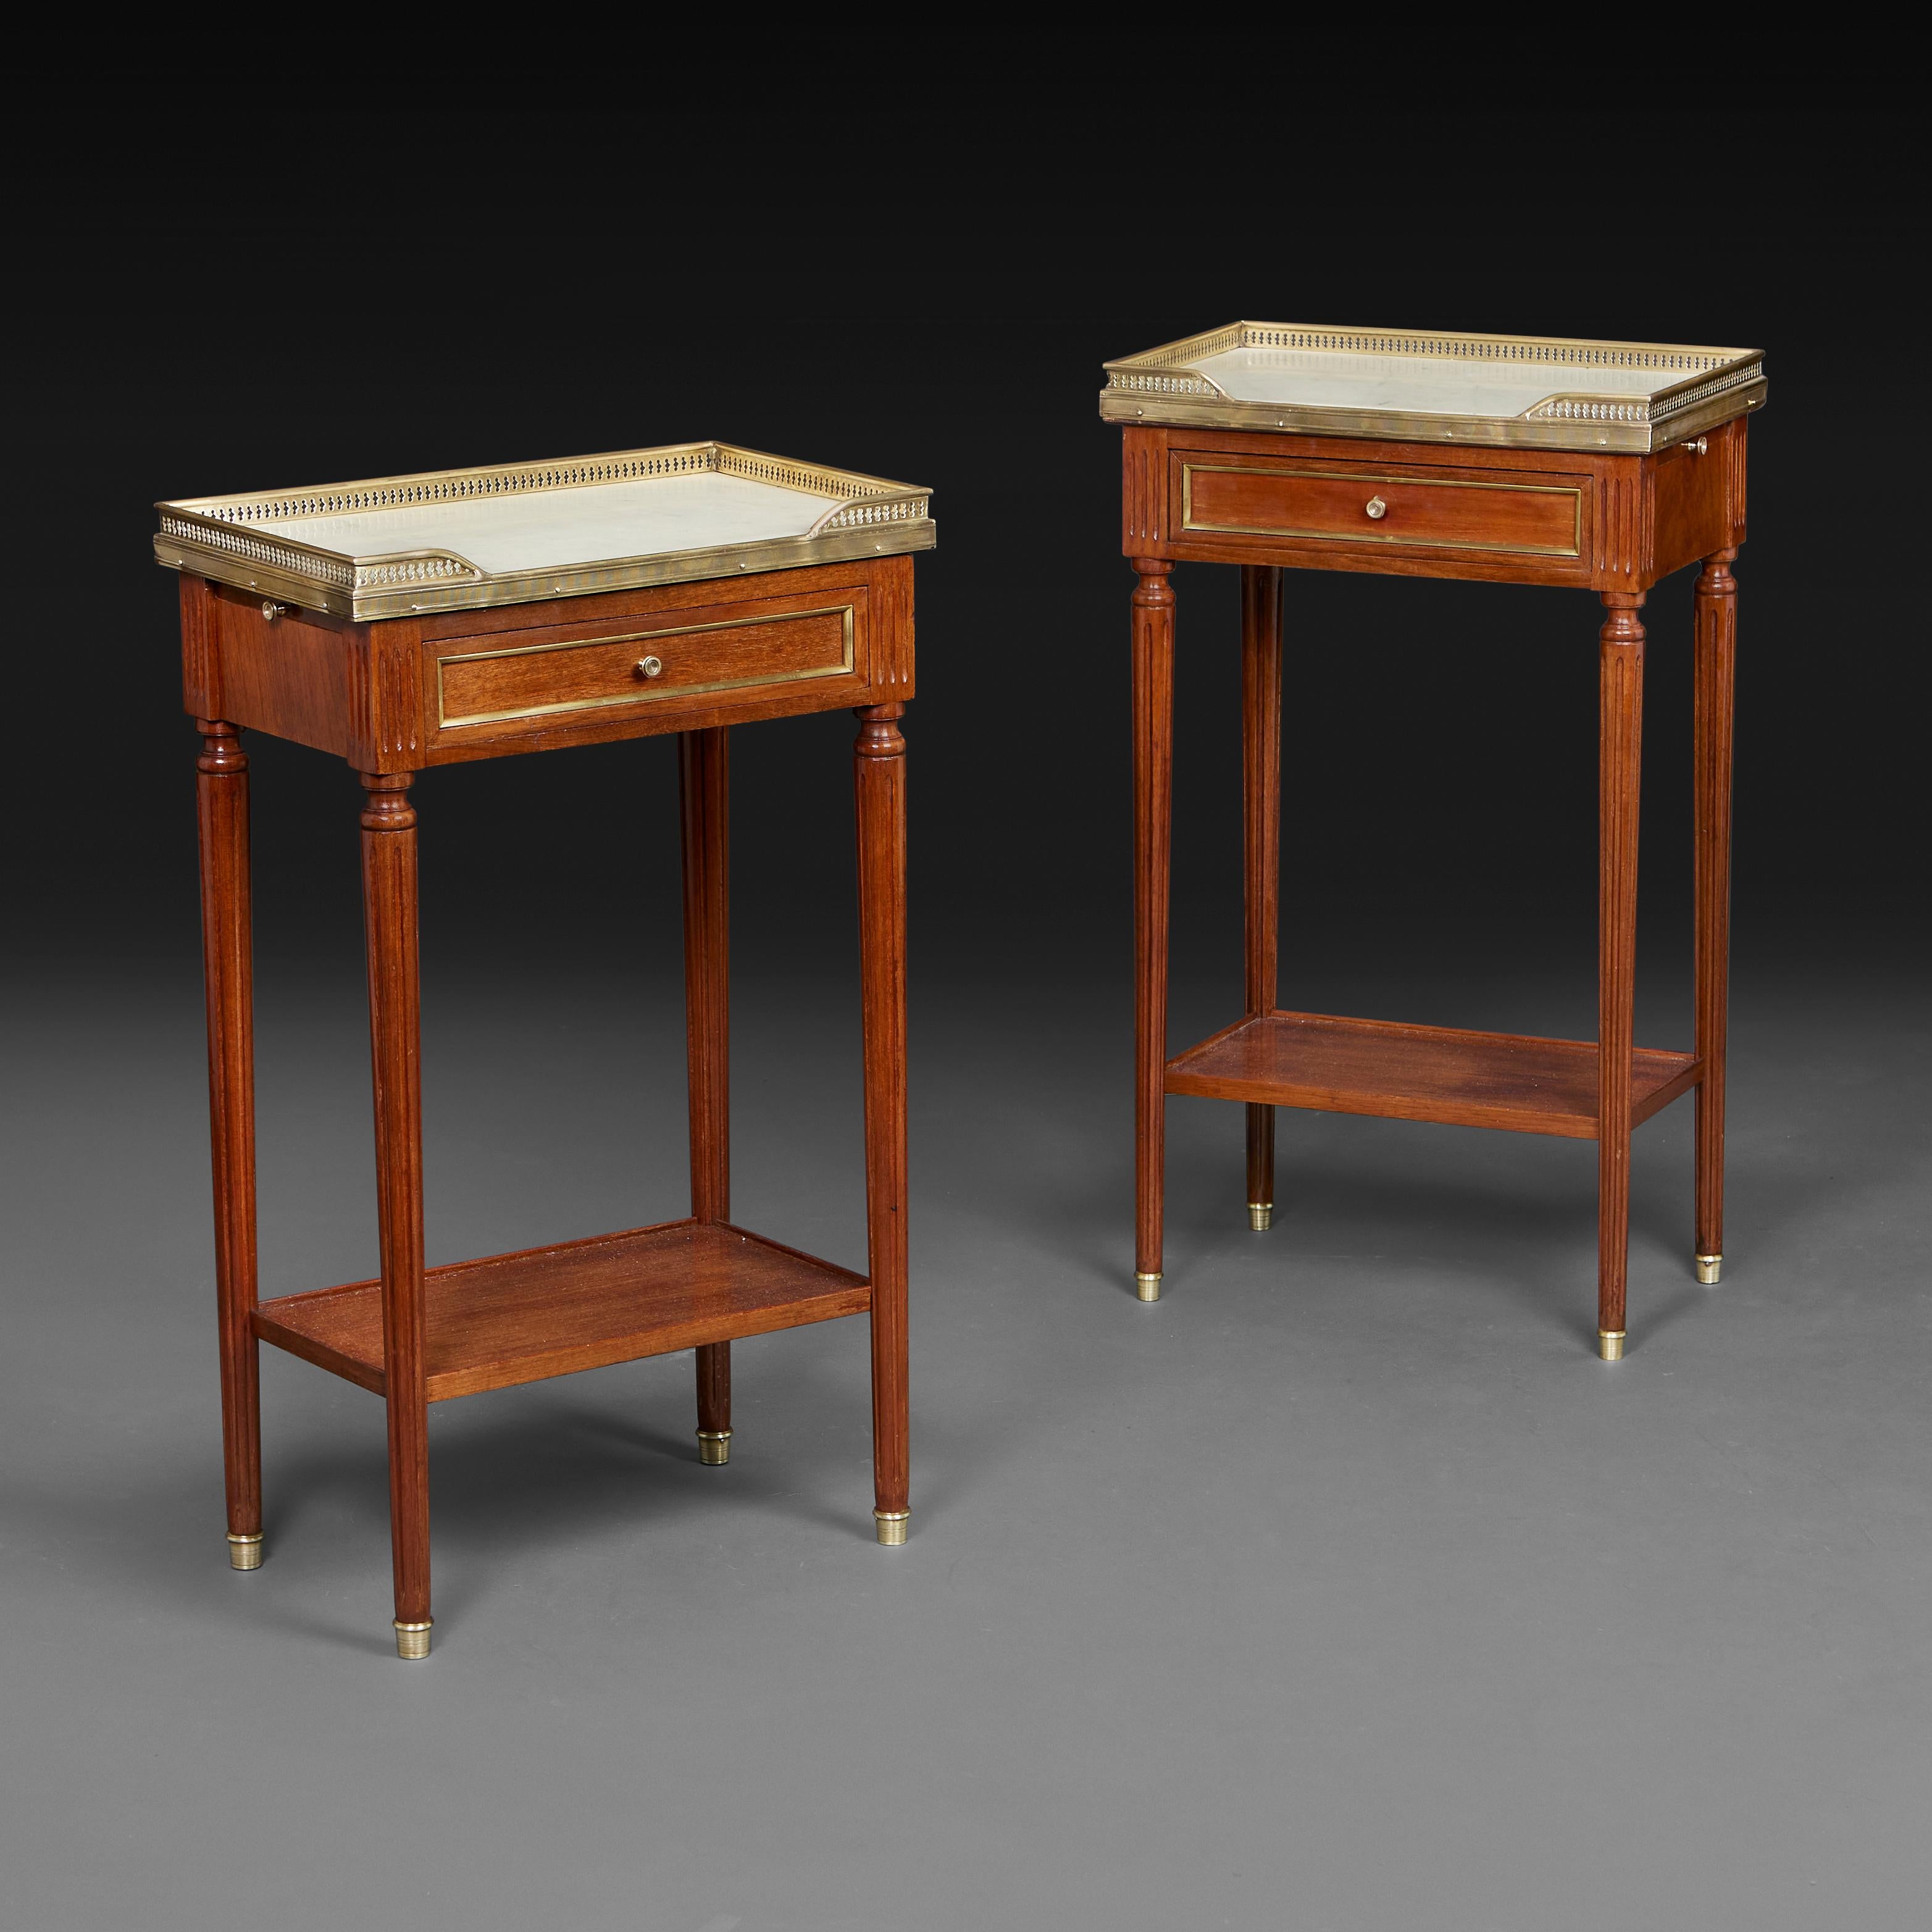 France, circa 1890

A pair of Louis XVI style mahogany bedside tables with white marble tops, brass galleries, reading slides to one side and a single drawer to the frieze, all supported on fluted and tapering legs terminating in brass